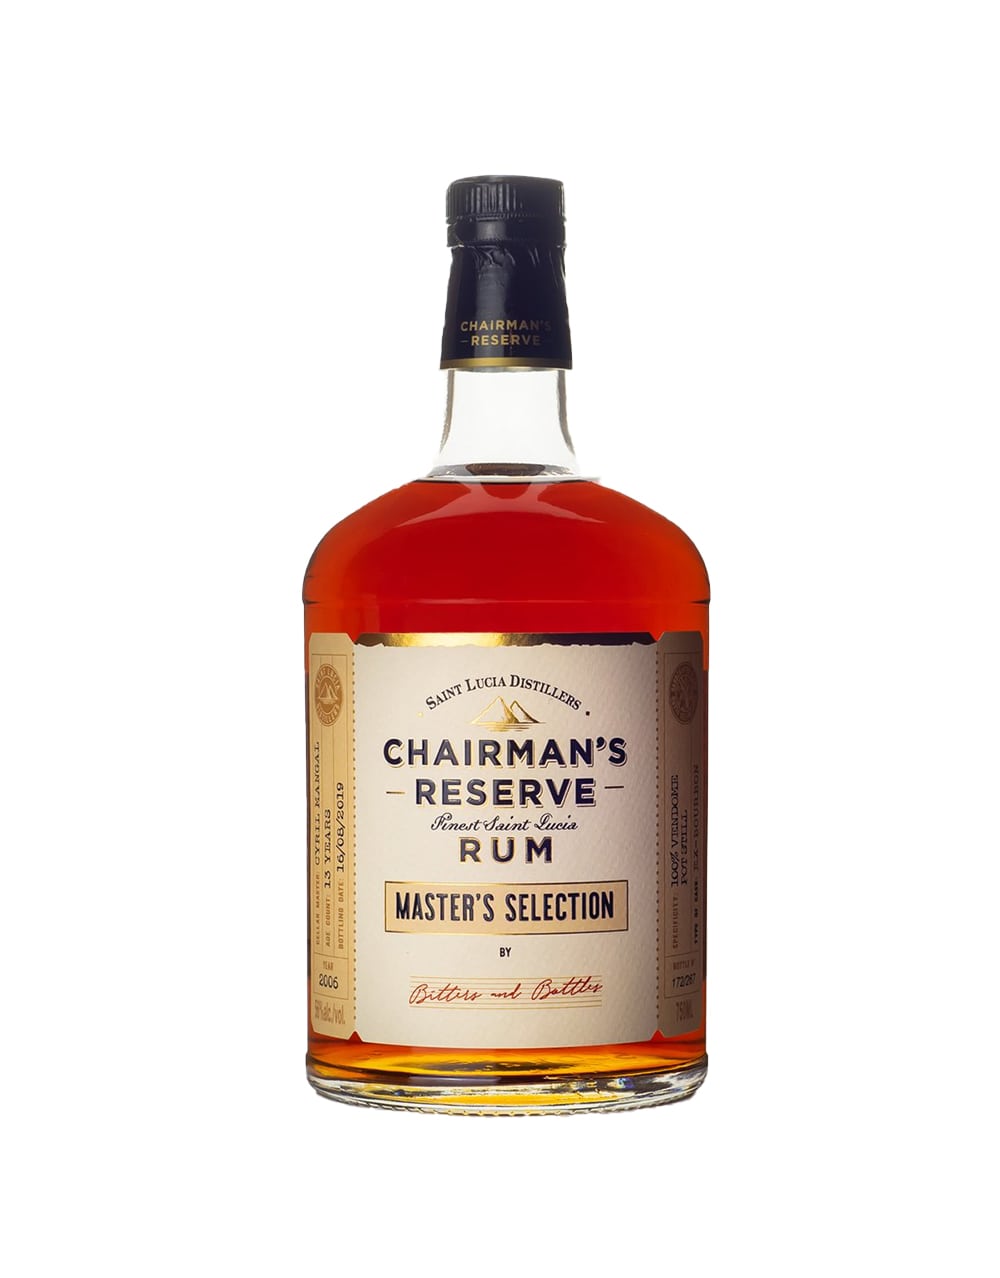 Chairmans Reserve Masters selection Spiribam 19 year old Saint Lucia Rum